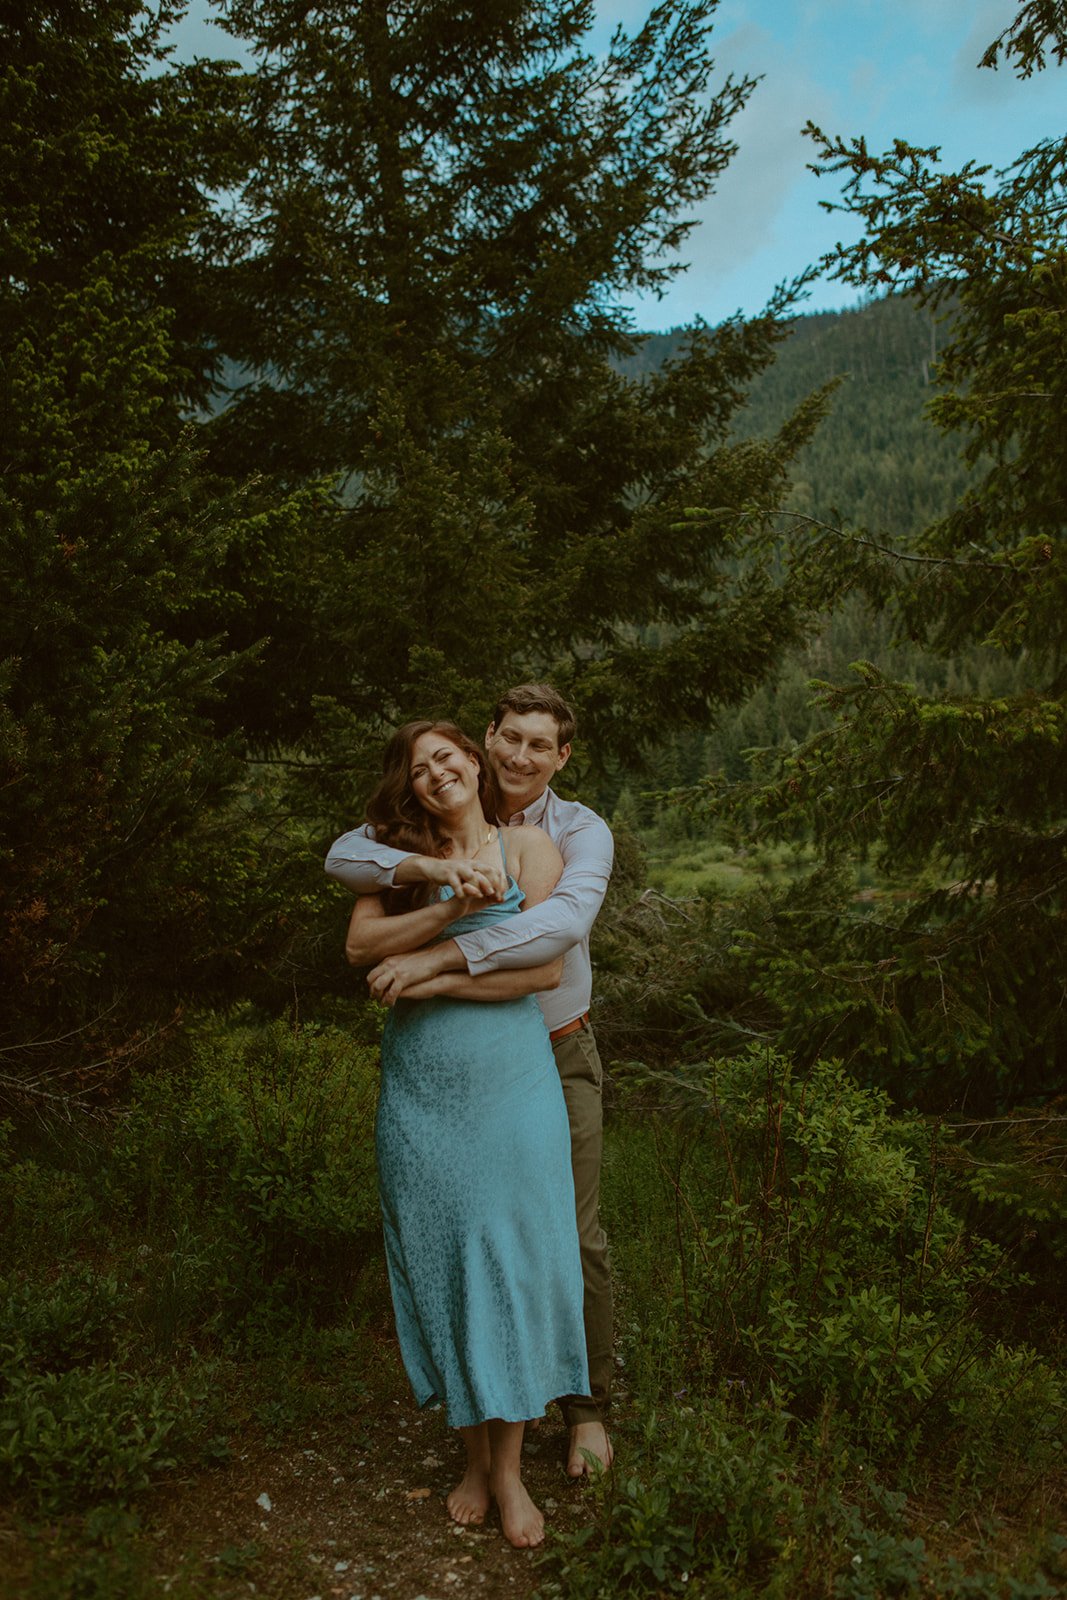 A Gold Creek Pond Outdoor Engagement Session - Shanean + Ian (41).jpg